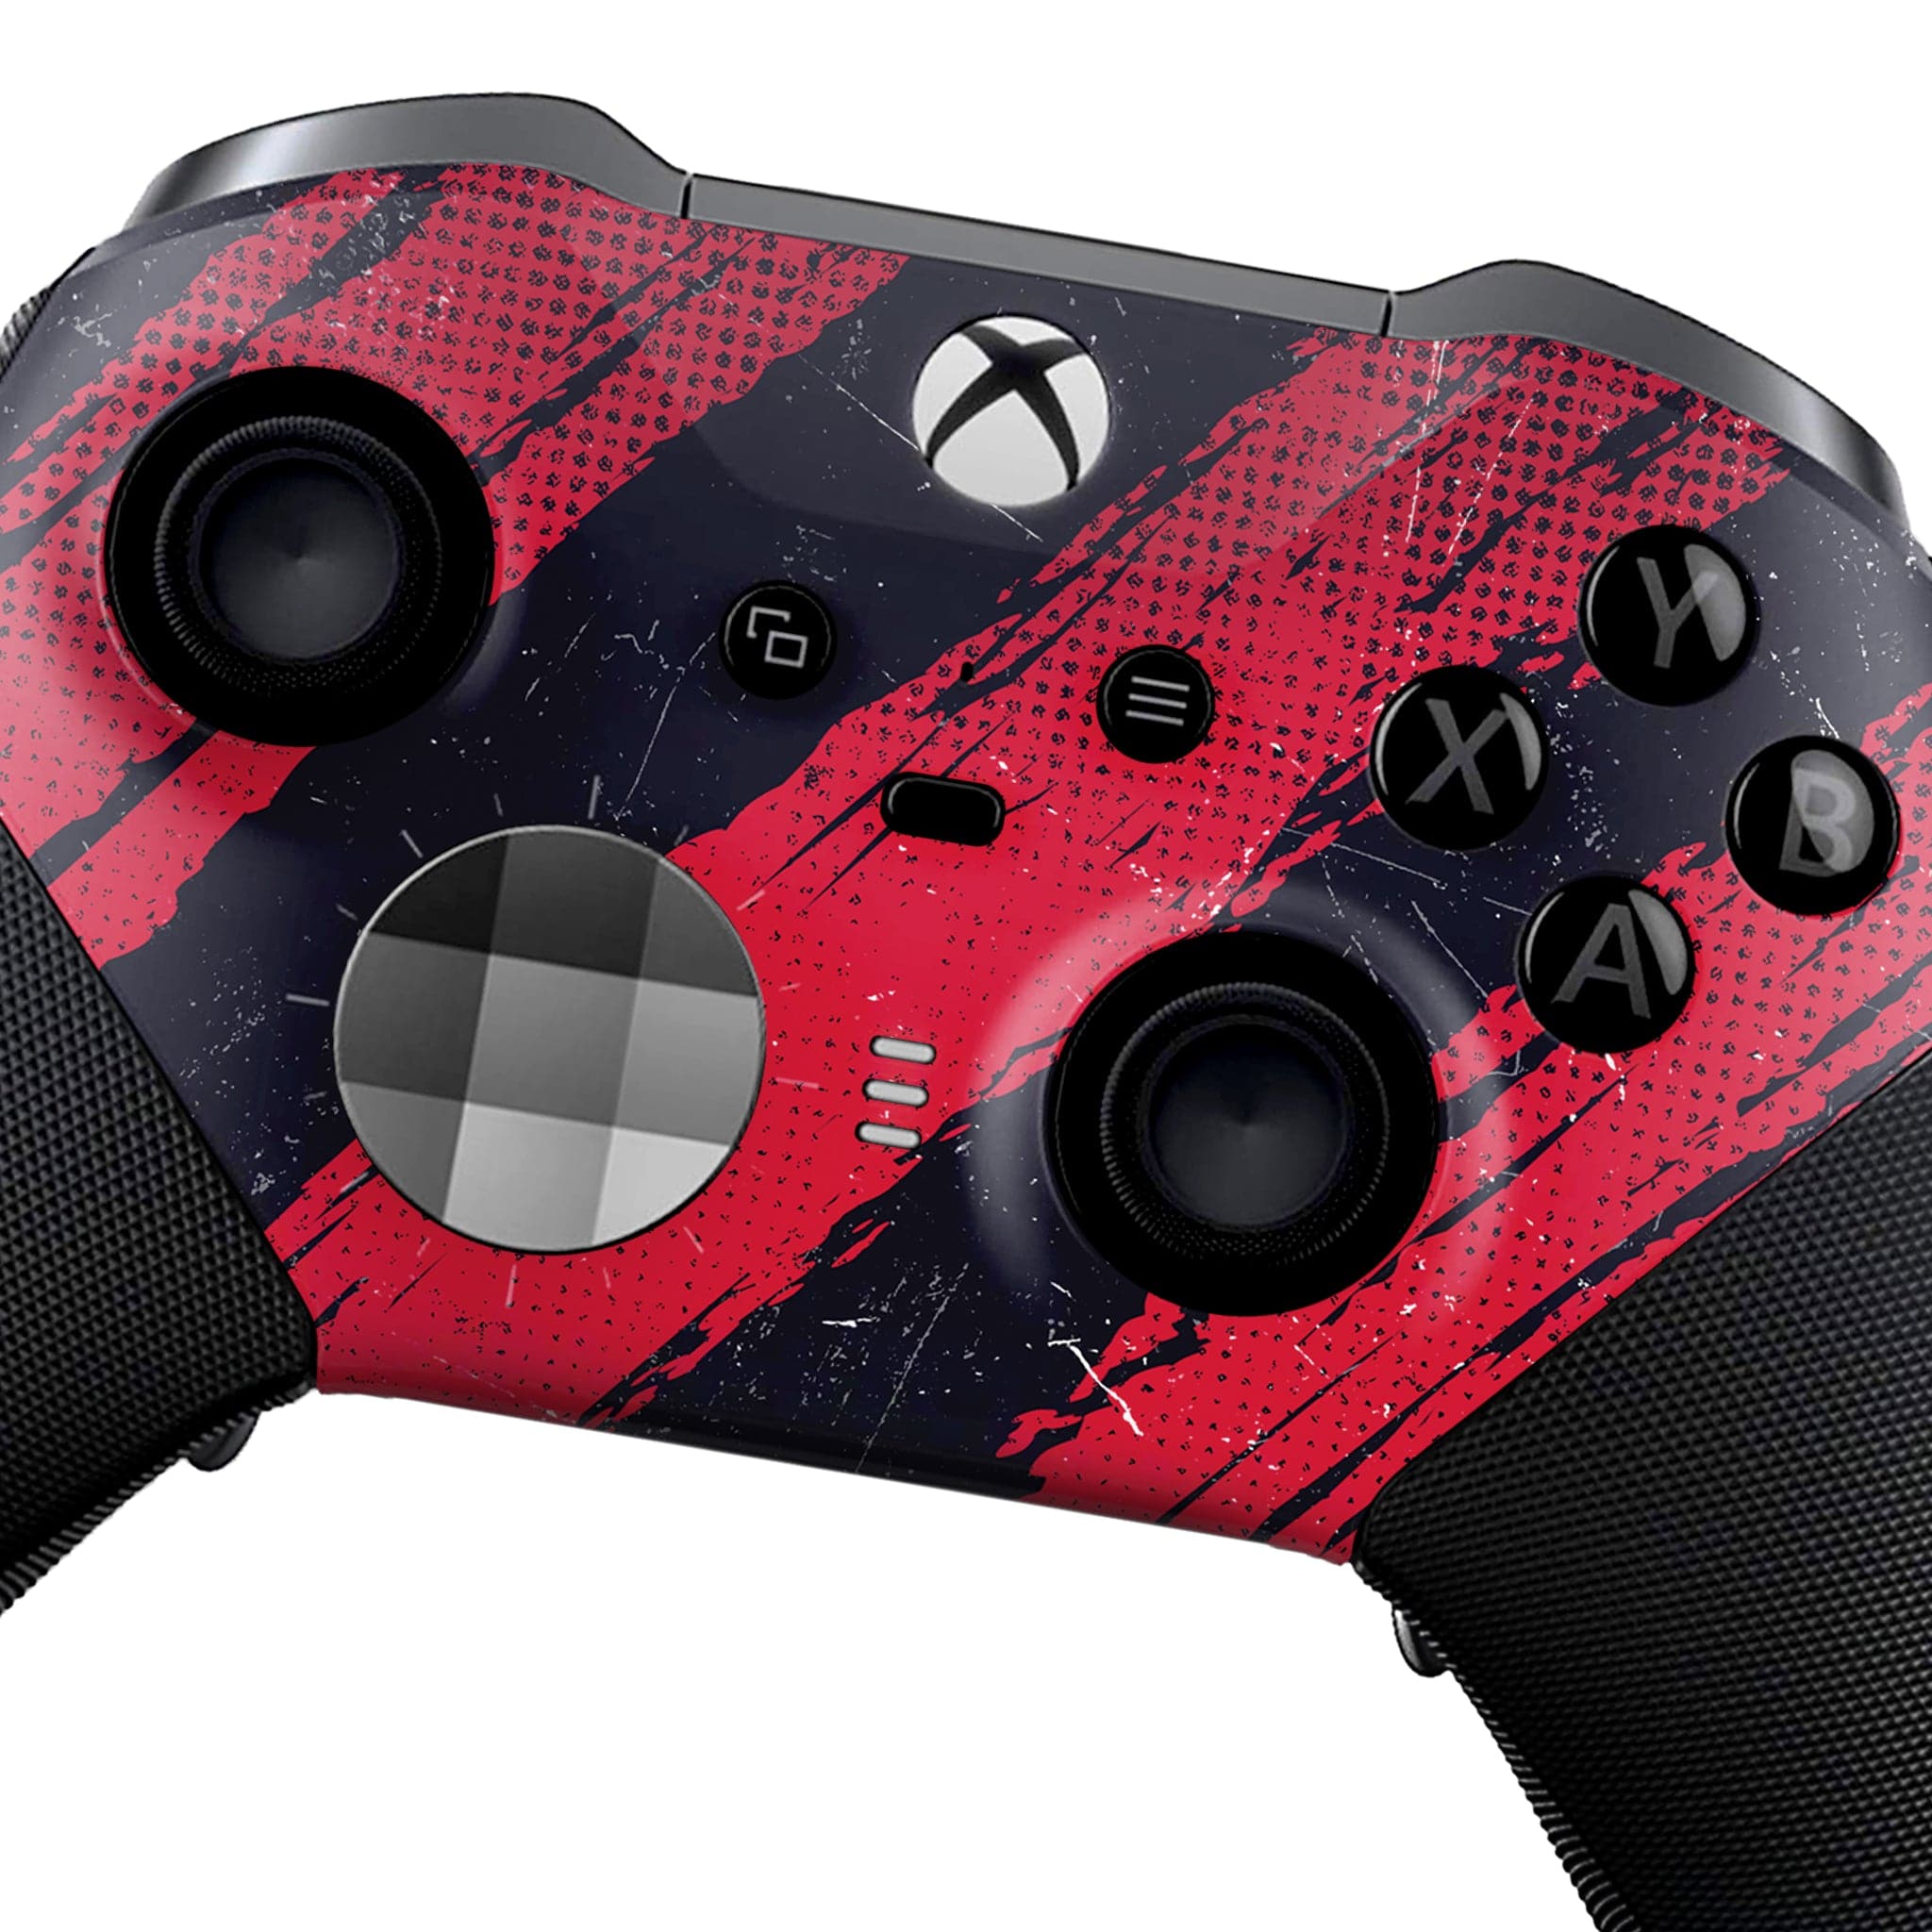 Ripper Red Xbox Elite Series 2 Controller: Use Nintendo Switch Controller on PC